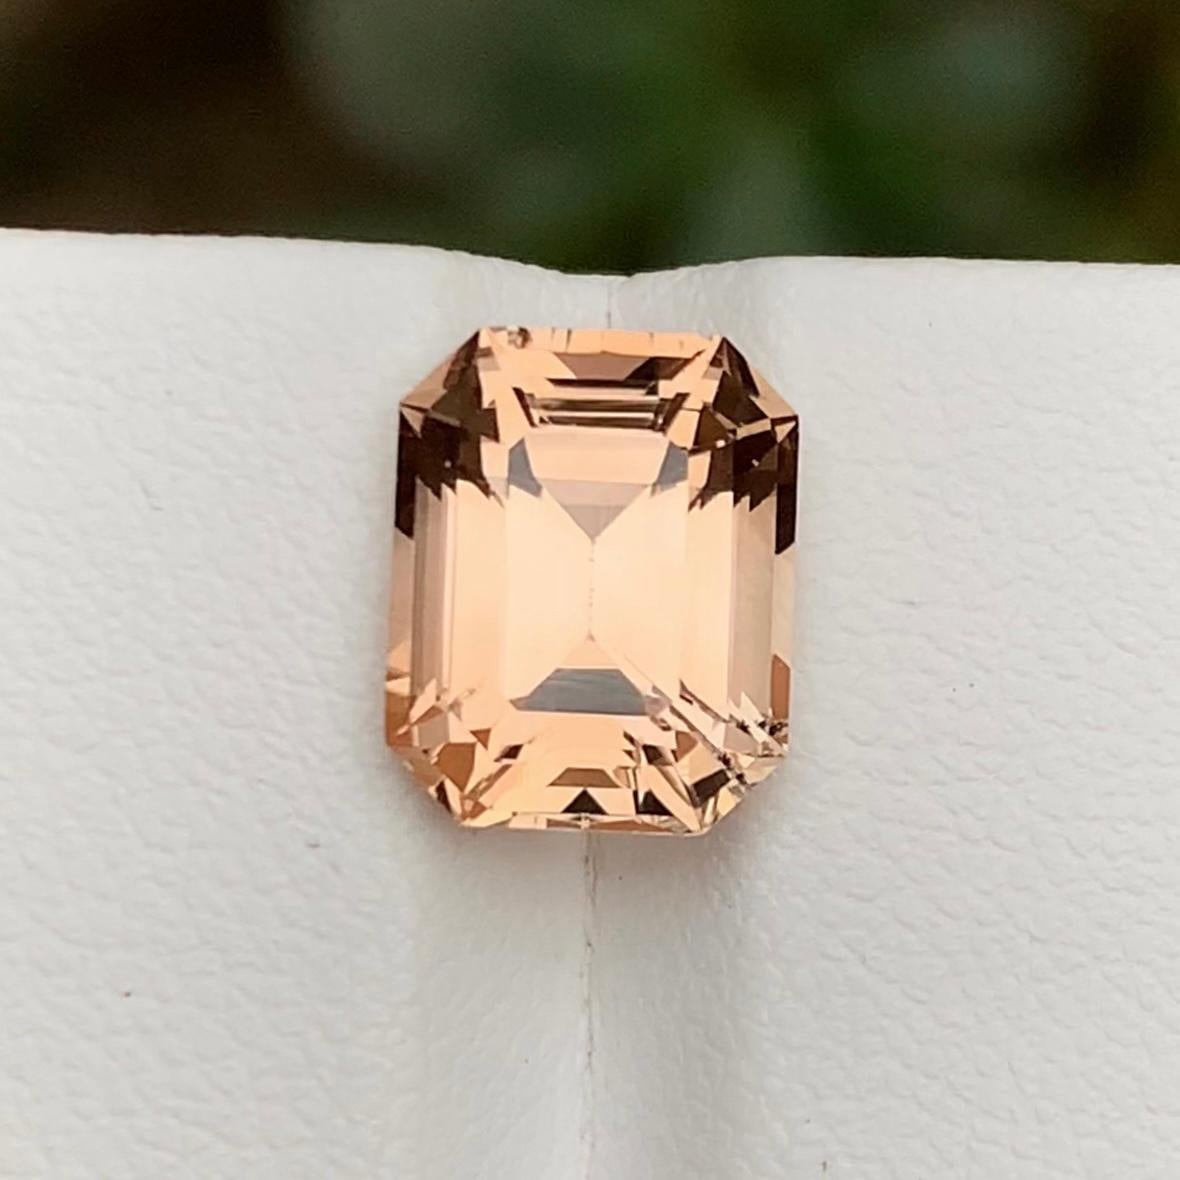 Gemstone Type: Imperial Topaz
Weight: 4.75 Carats
Dimensions: 
Color: Golden Peach
Clarity: Eye Clean
Treatment: Heated
Origin: Pakidtan
Certificate: On demand 


Ignite your passion with this 4.75 Carat Golden Peach Imperial Topaz Gemstone, a fiery